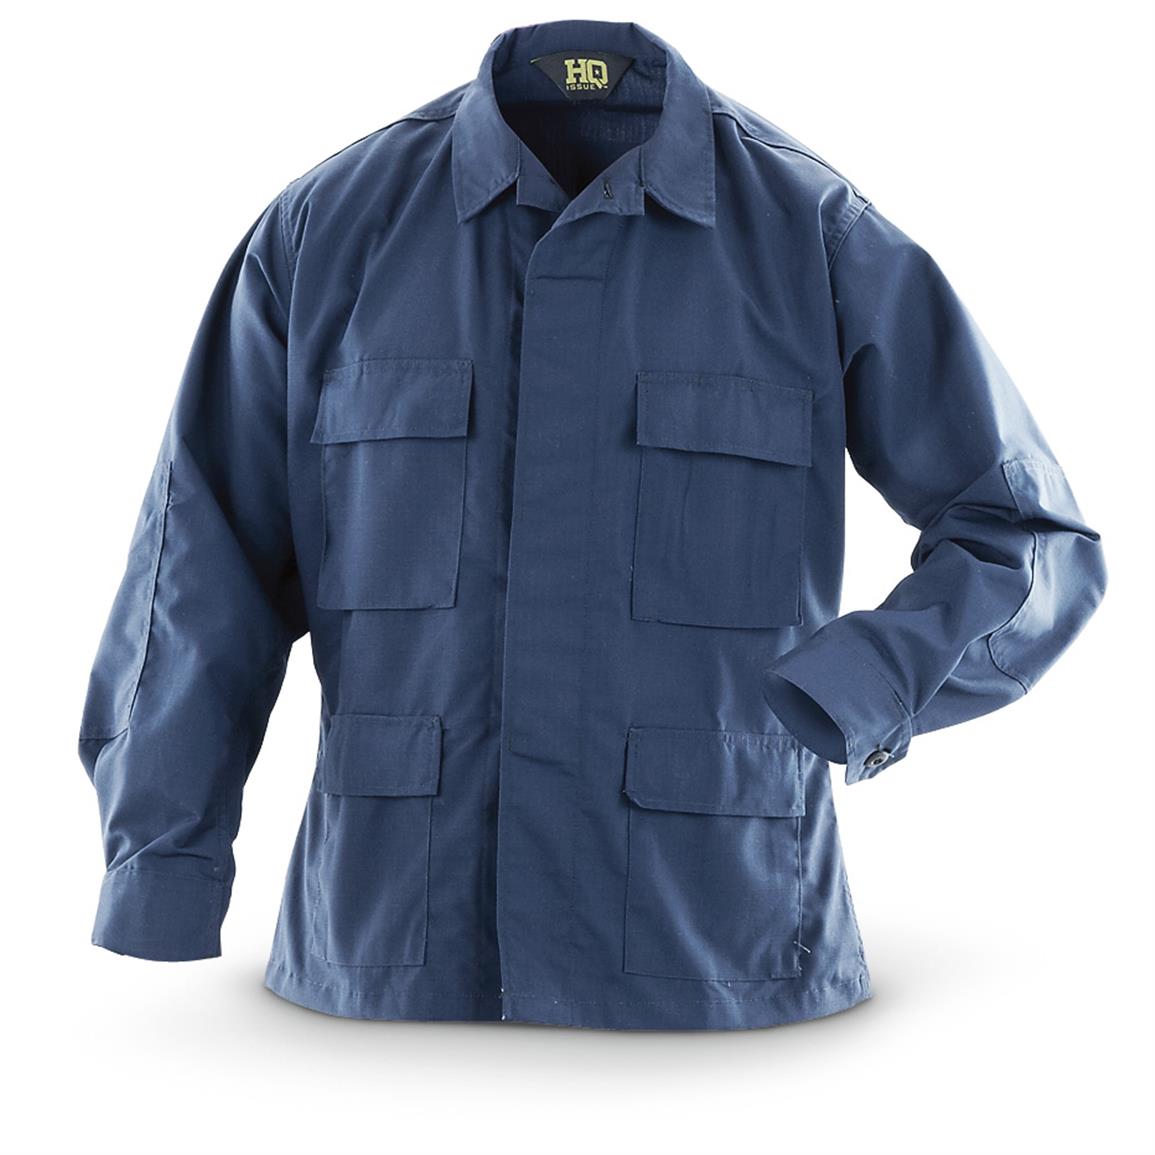 HQ ISSUE Military-style NYCO BDU Tactical Shirt - 633891, Shirts at ...